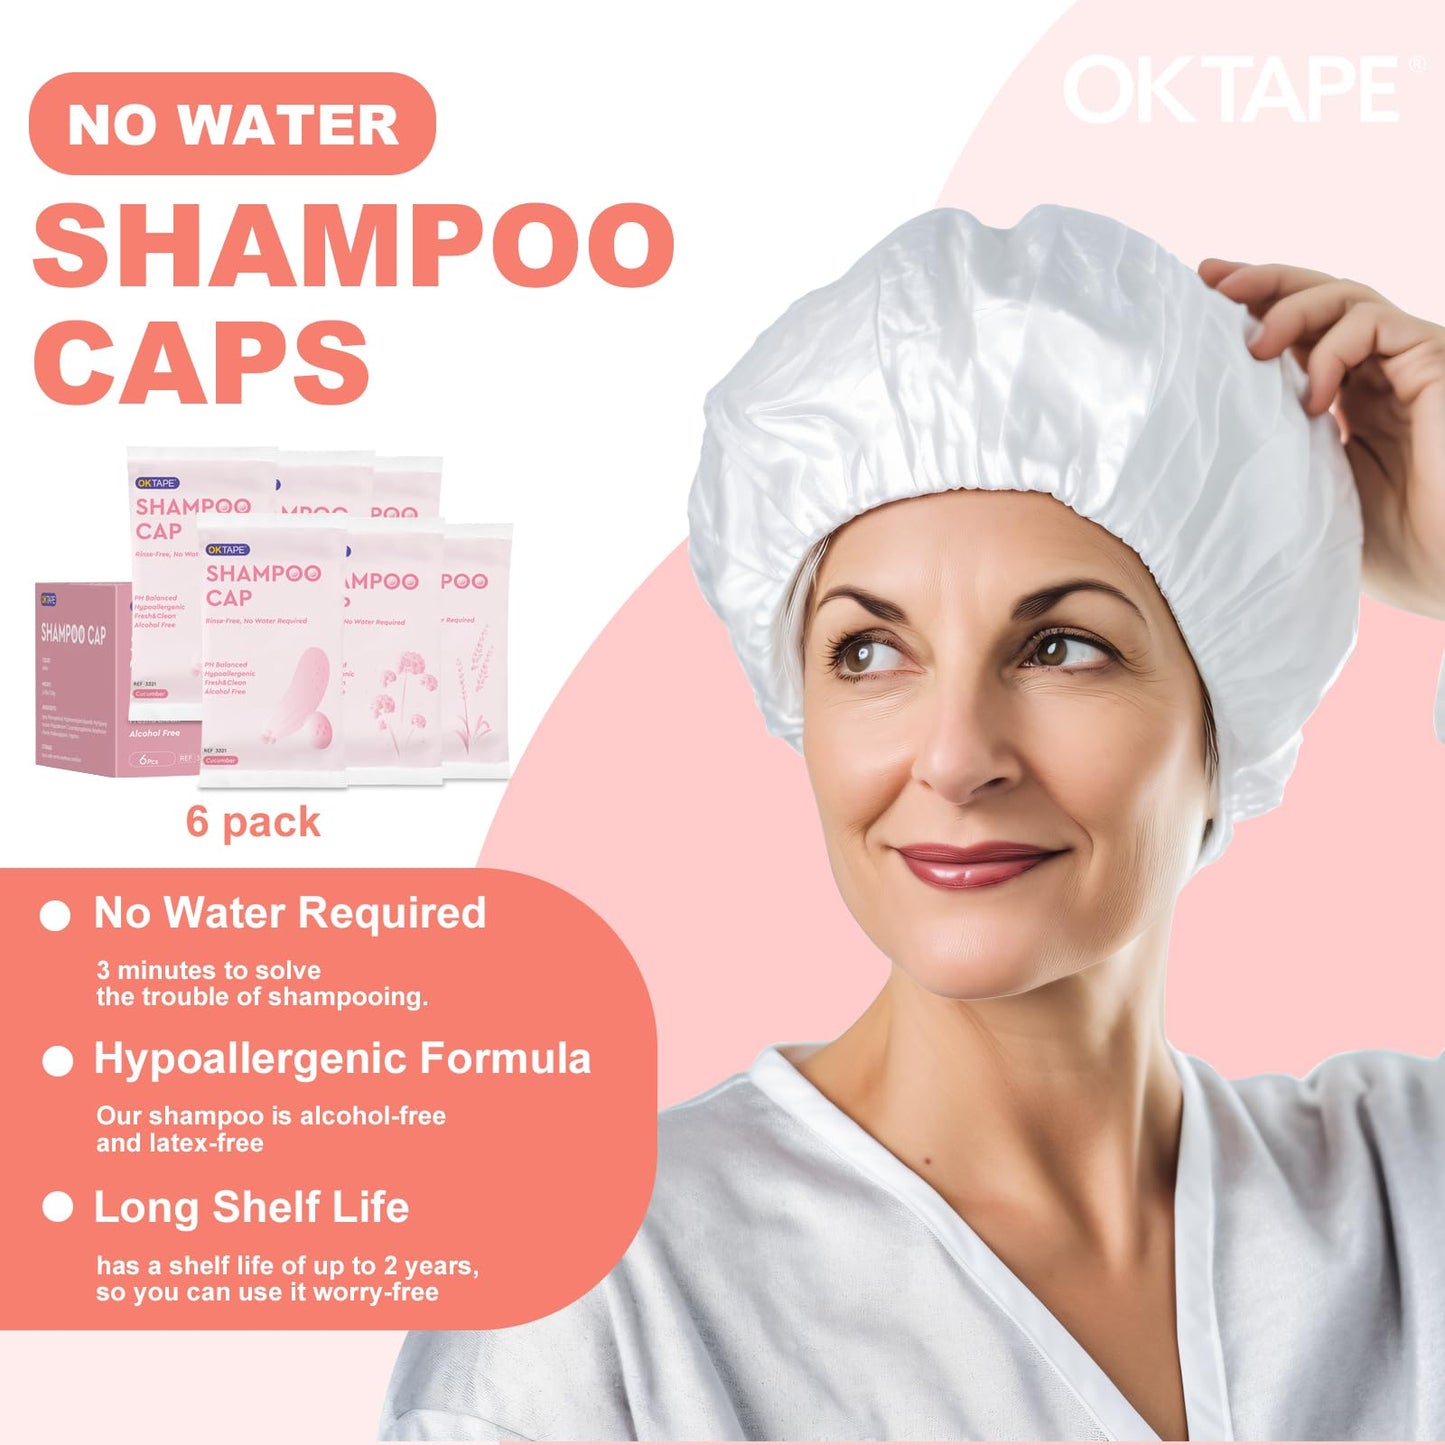 OK TAPE No Water Rinse Free Shampoo Cap (6 Packs), Microwaveable Shampoo Caps for Bedridden Patients or Elderly, Waterless Shampoo and Condition Hair, Cucumber, Lavender, Verbenae 3 Fragrances